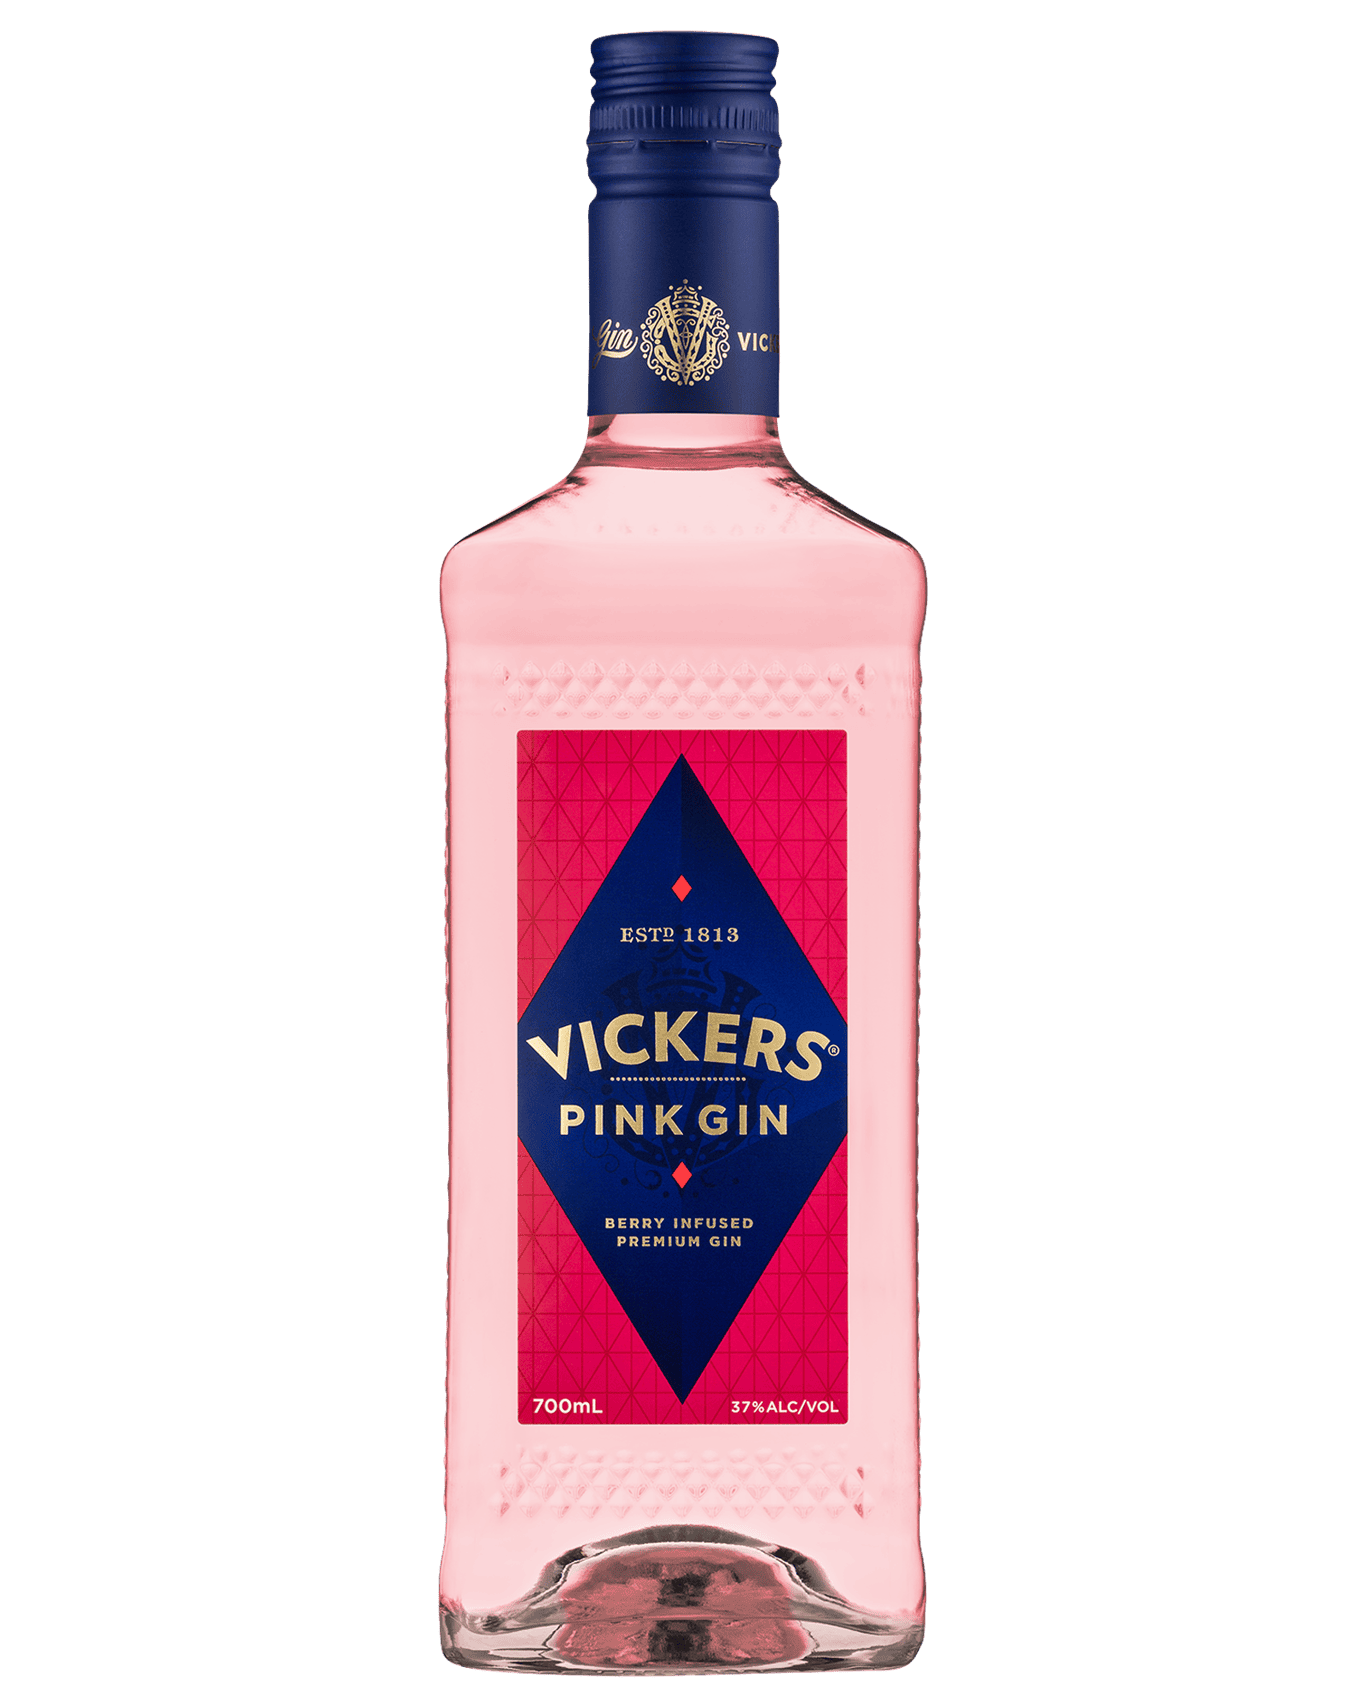 Vickers Pink Gin 700ml